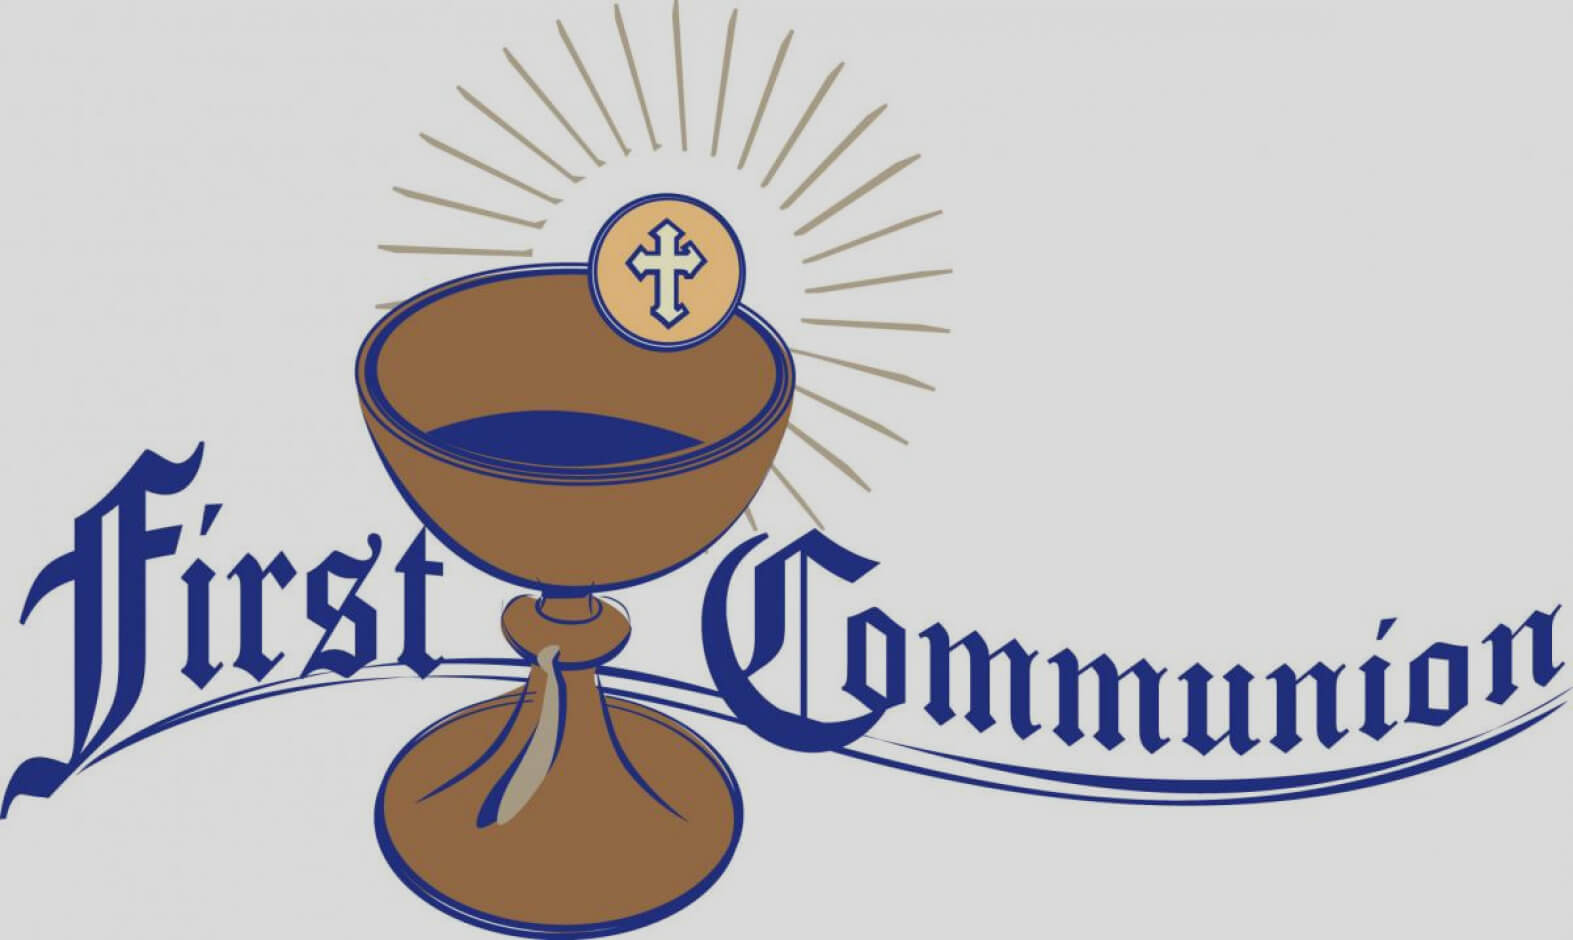 First Clipart Comunion, Picture #42280 First Clipart Comunion Throughout First Holy Communion Banner Templates